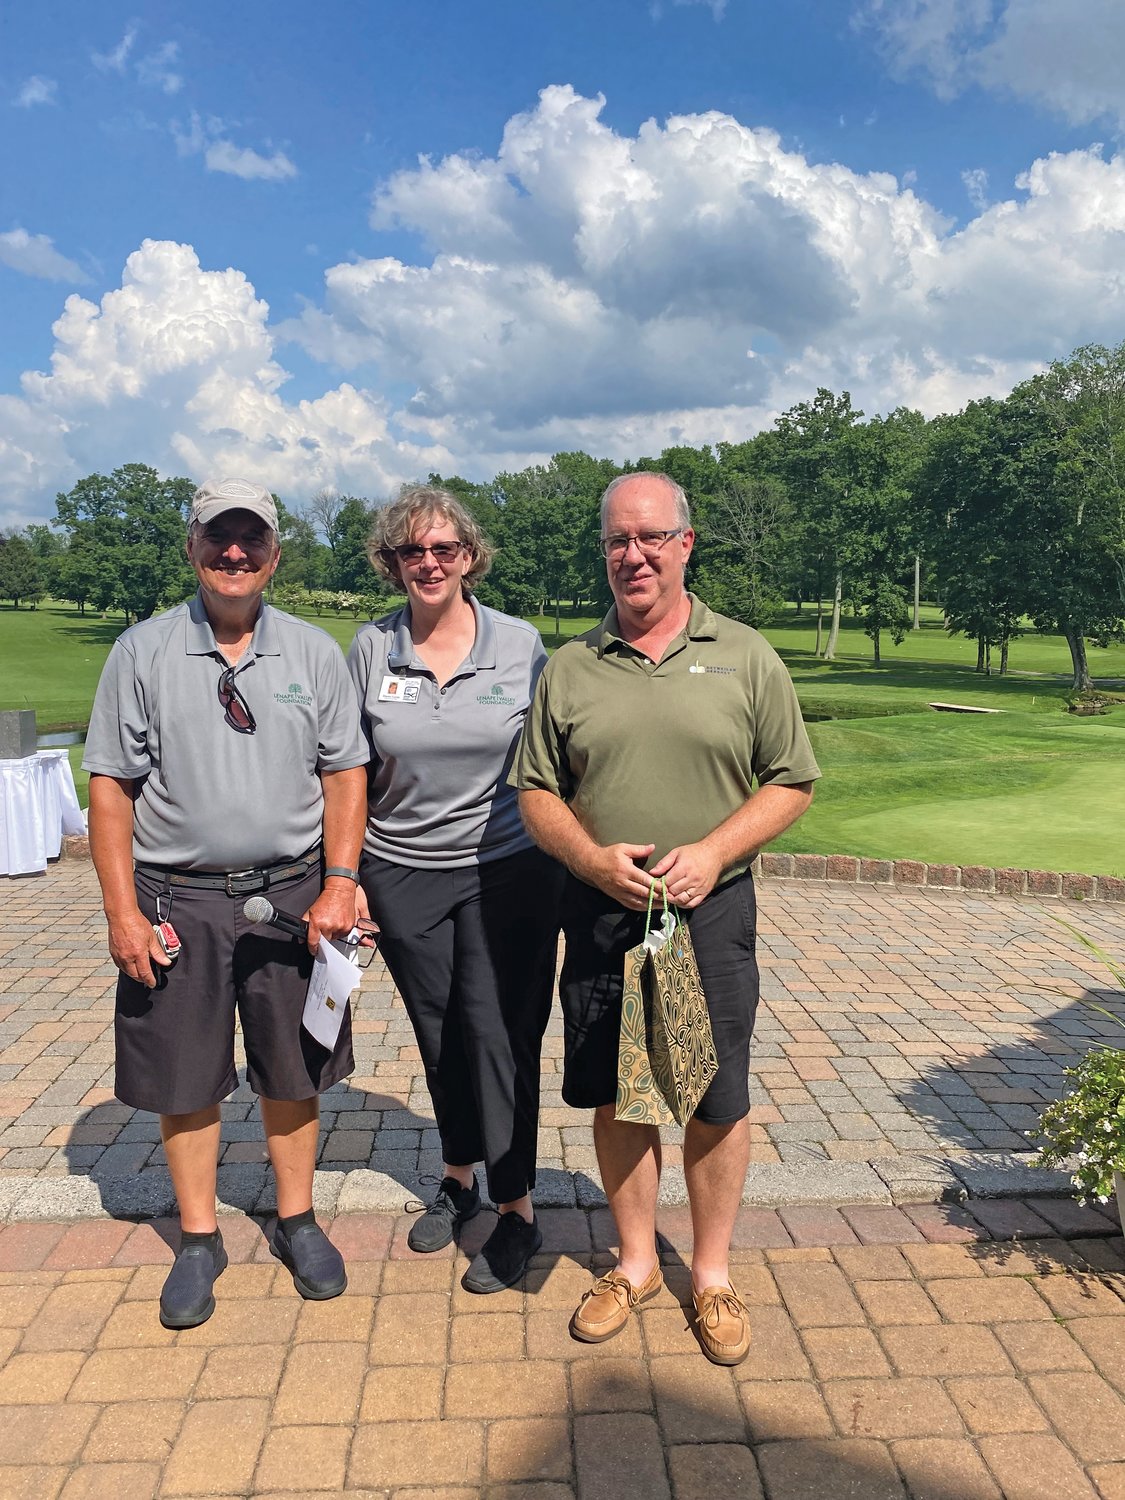 Robert Rogala, golf chairperson; Sharon Curran, CEO, Lenape Valley Foundation; and Bruce Thomas, Putting Contest winner.